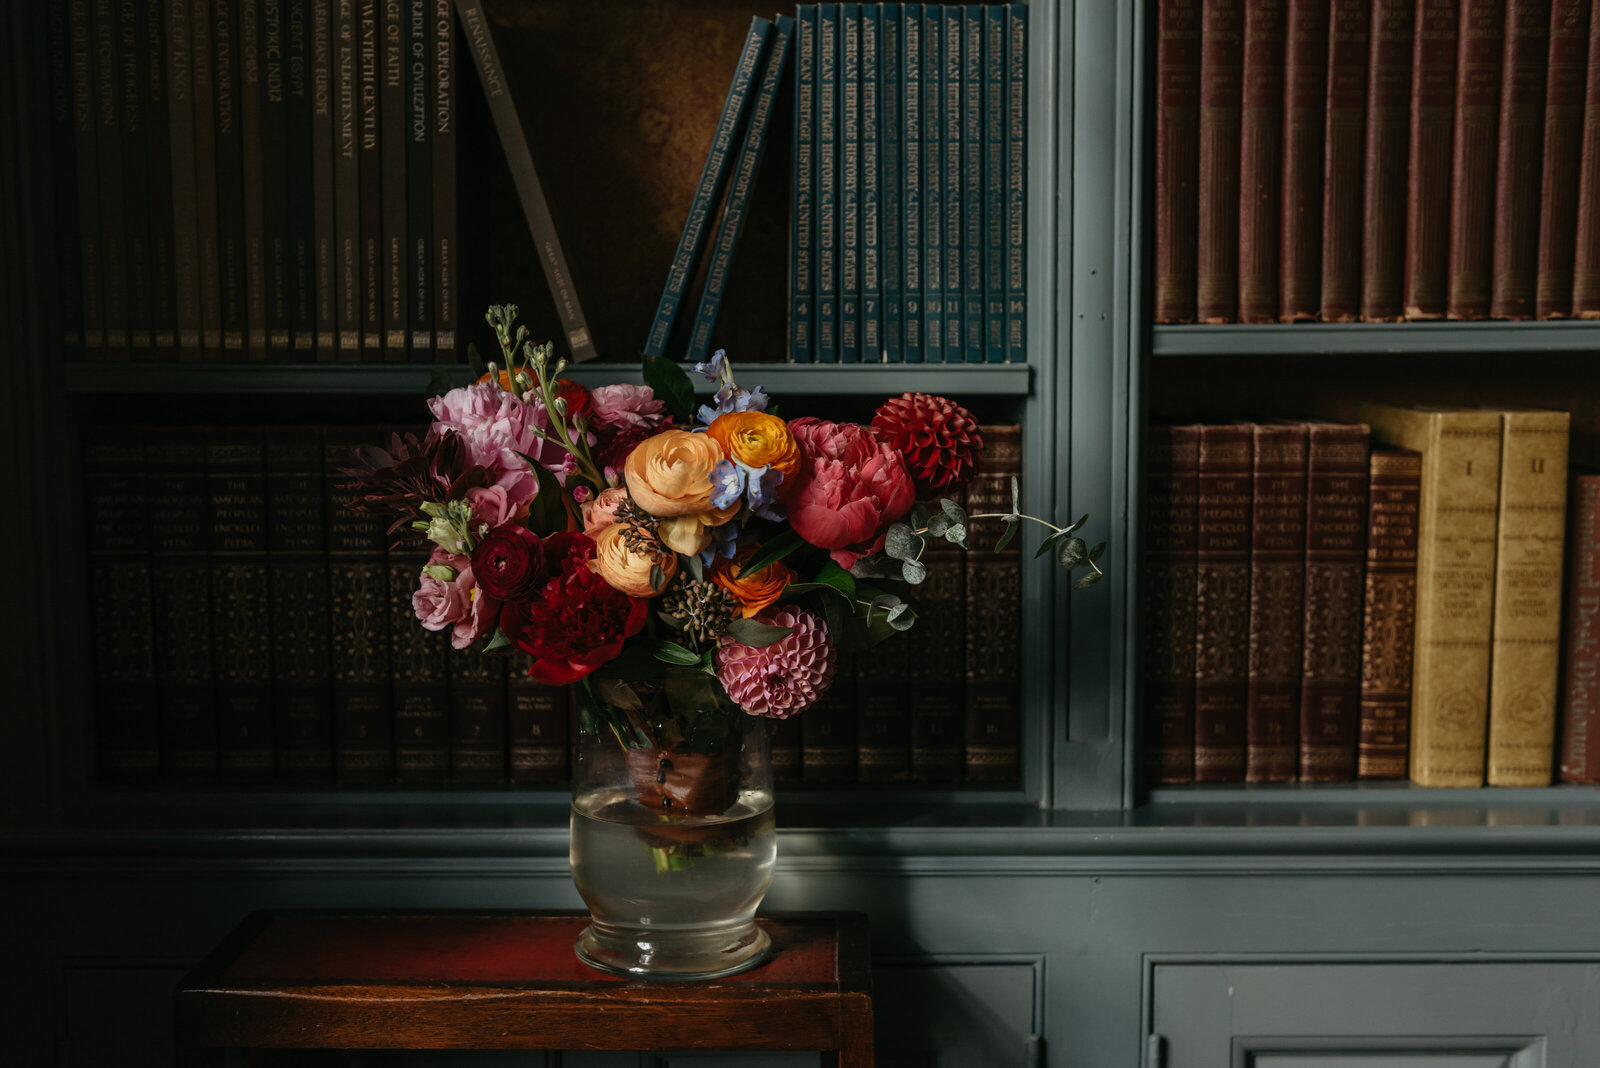 A colorful bouquet of flowers sits in front of a shelf of books